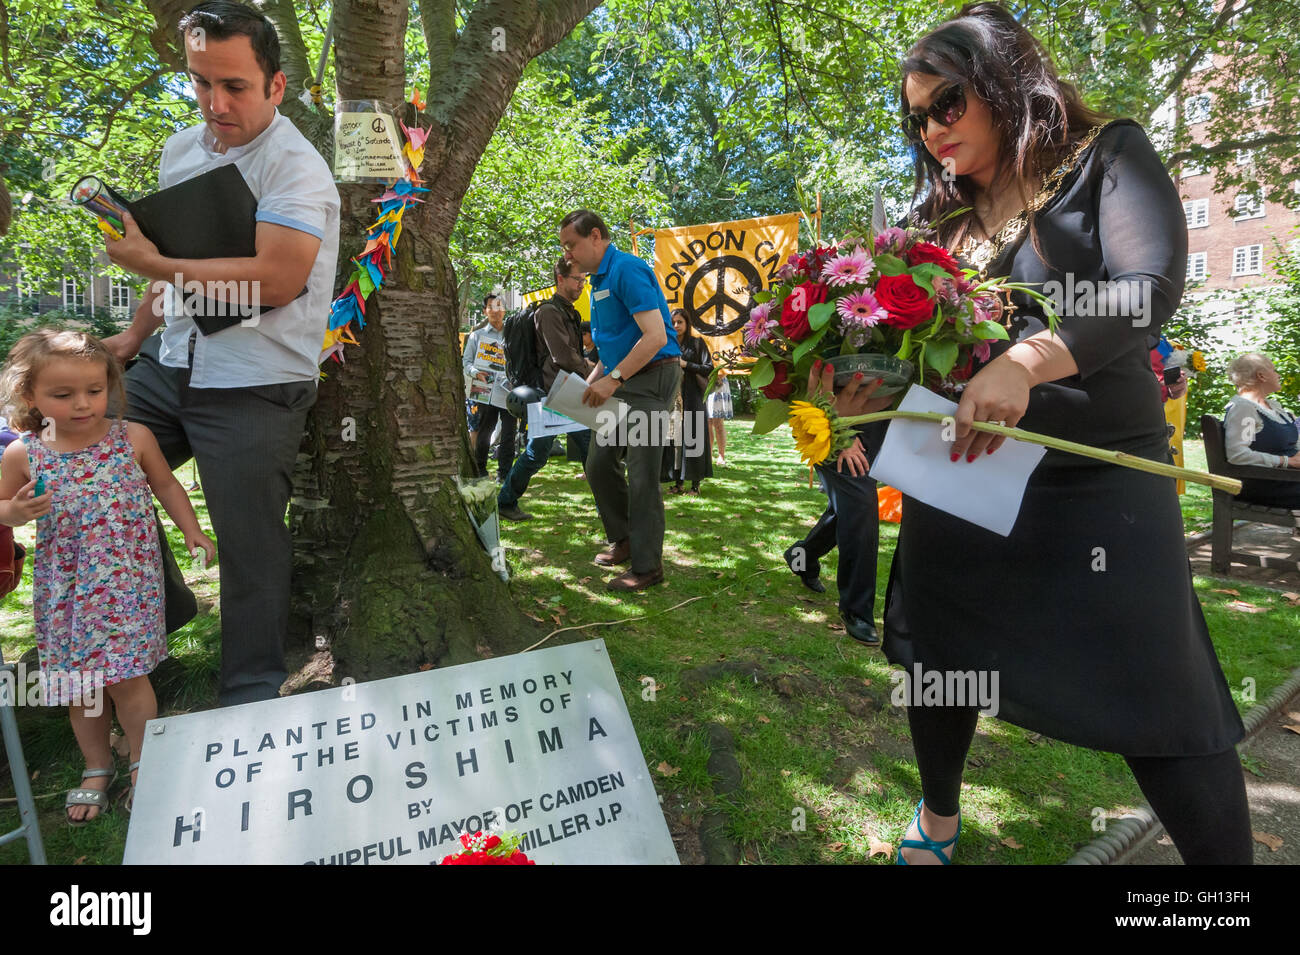 London, UK. 6th August 2016. Cllr Nadia Shah, Mayor of Camden, lays a wreath at  the commemorative cherry tree at the CND ceremony in memory of the victims, past and present on the 71st anniversary of the dropping of the atomic bomb on Hiroshima and the second atomic bomb dropped on Nagasaki three days later. Peter Marshall/Alamy Live News Stock Photo